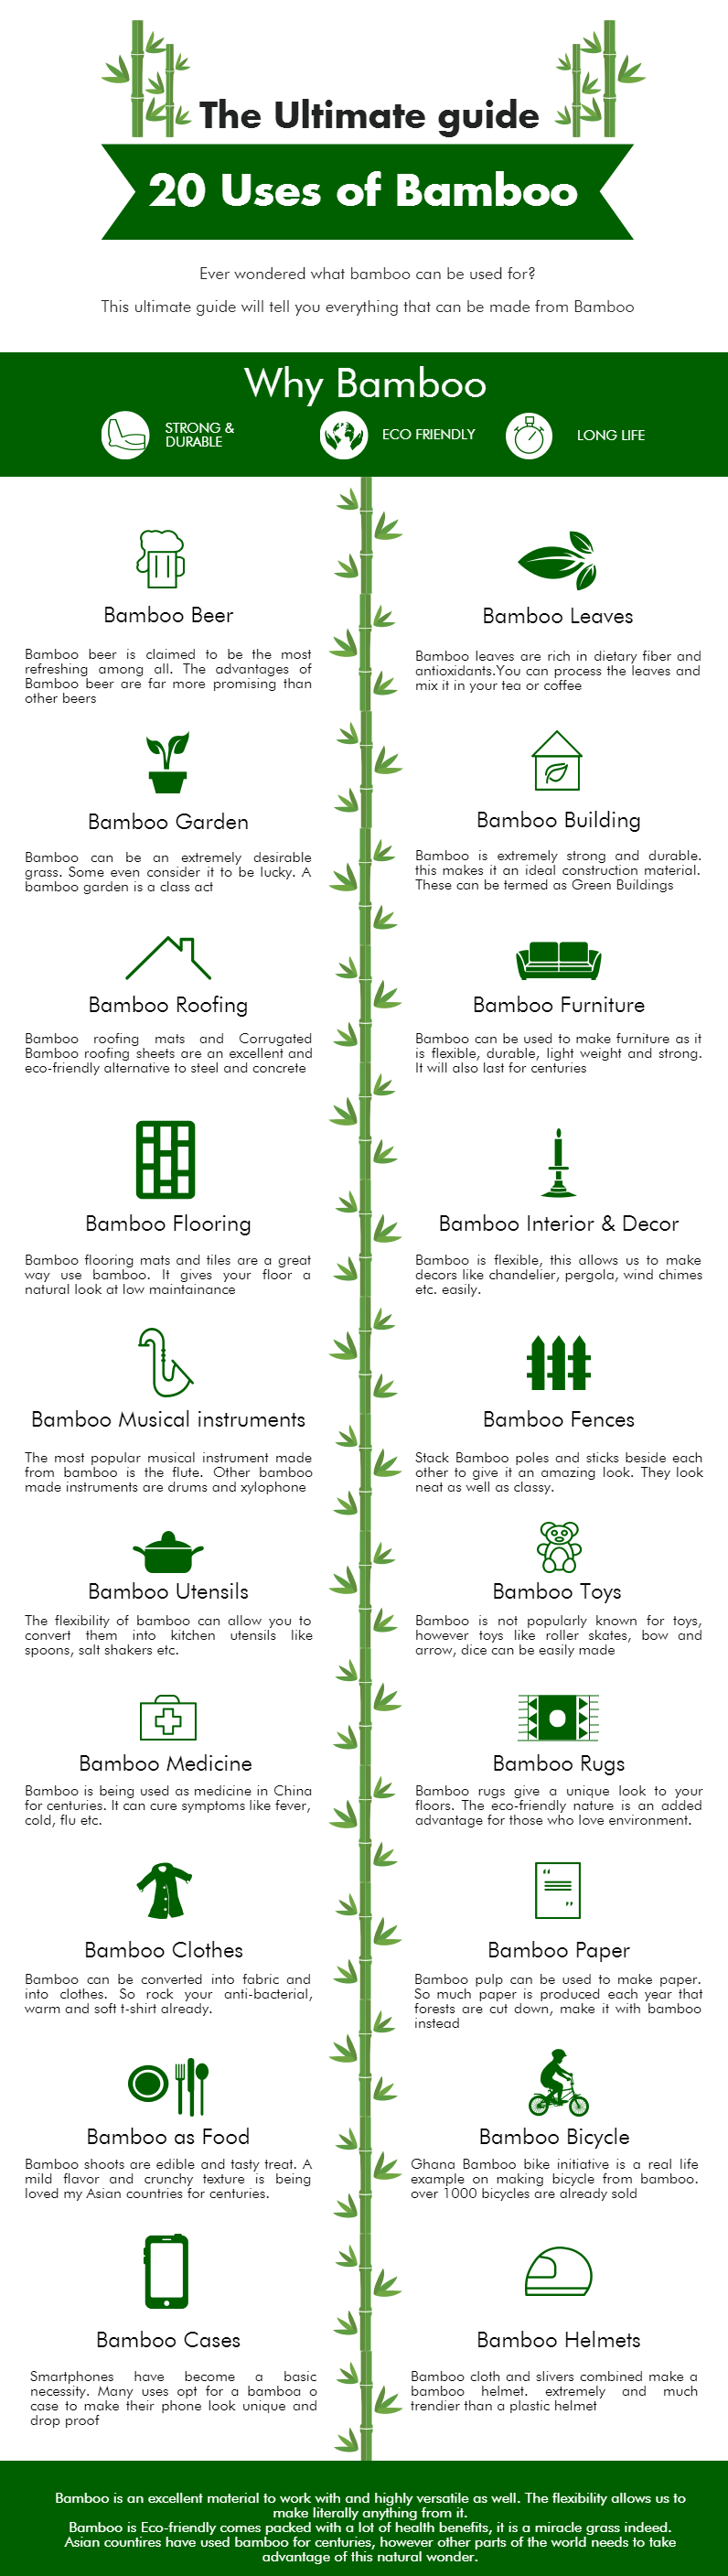 Uses of Bamboo Infographic by Bamboooz